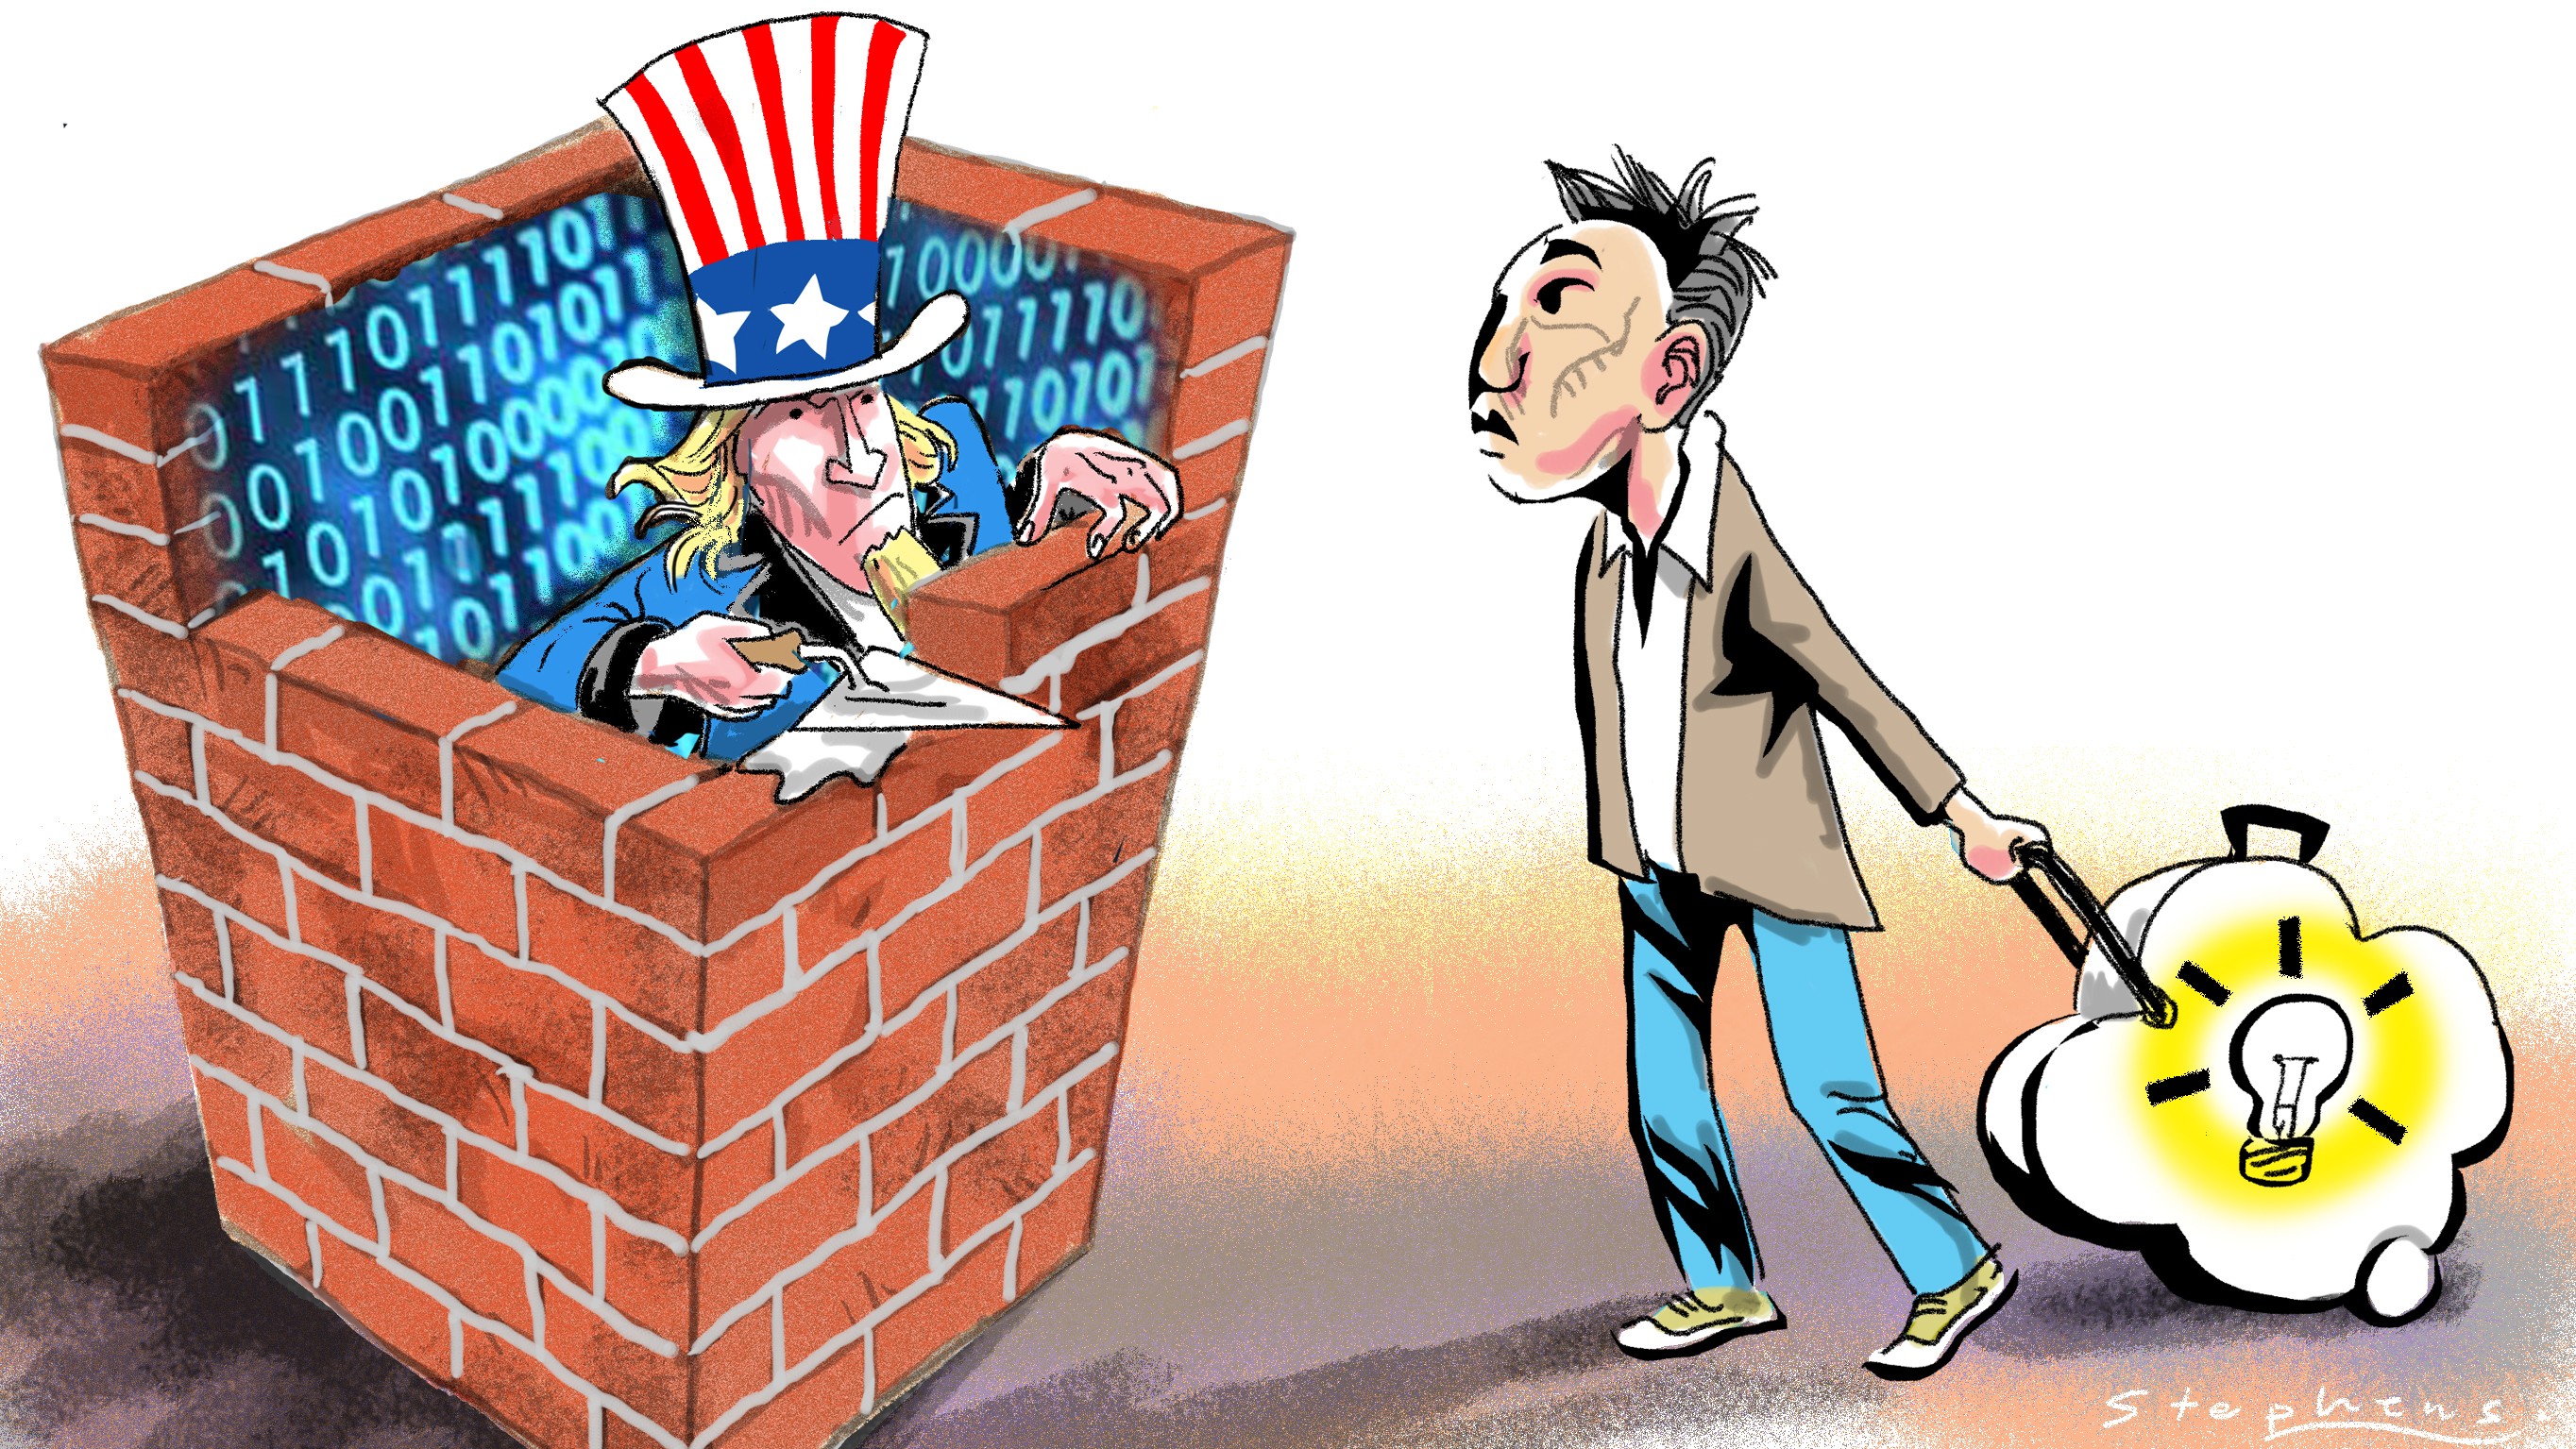 If the US administration targets Chinese researchers and builds walls barring talent, it will undermine the vibrancy of the US economy, hindering its ability to innovate. Illustration: Craig Stephens